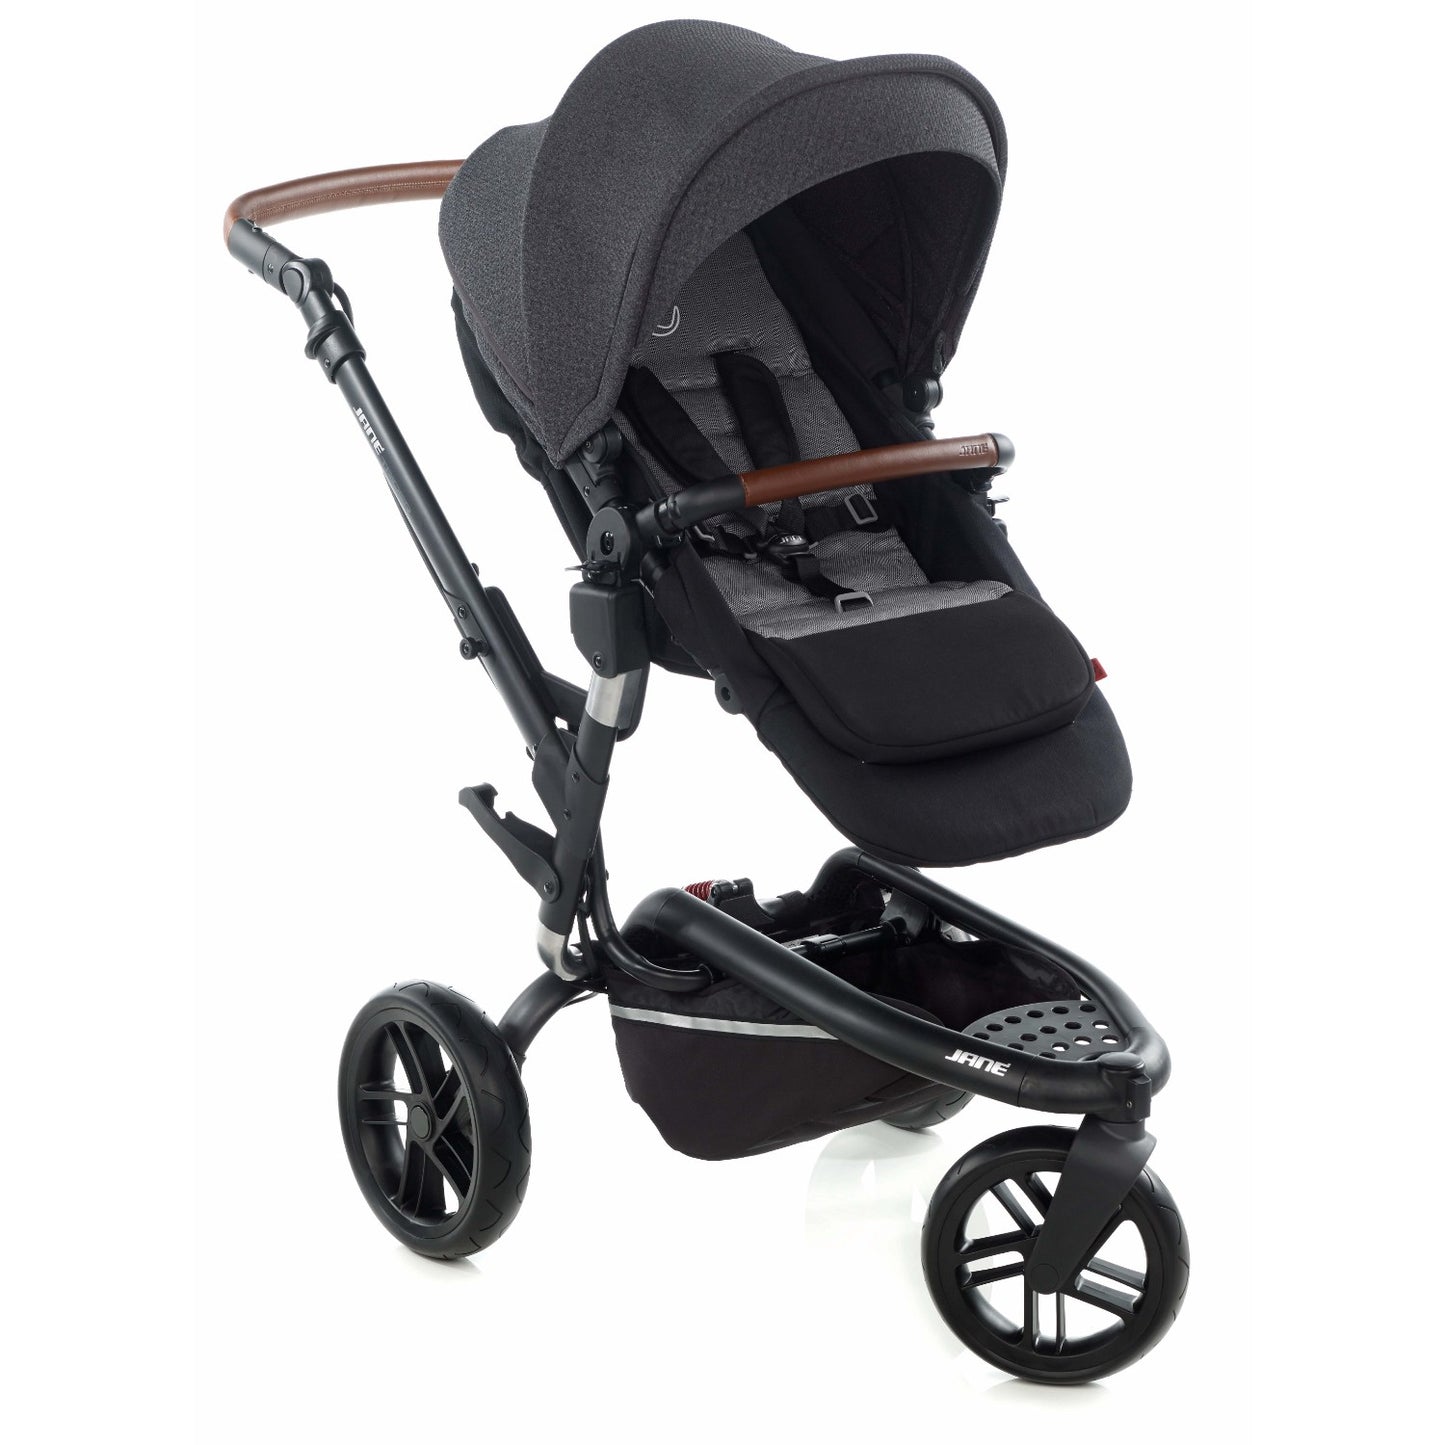 Jané Trider + Sweet Carrycot + Koos iSize 3-in-1 Travel System